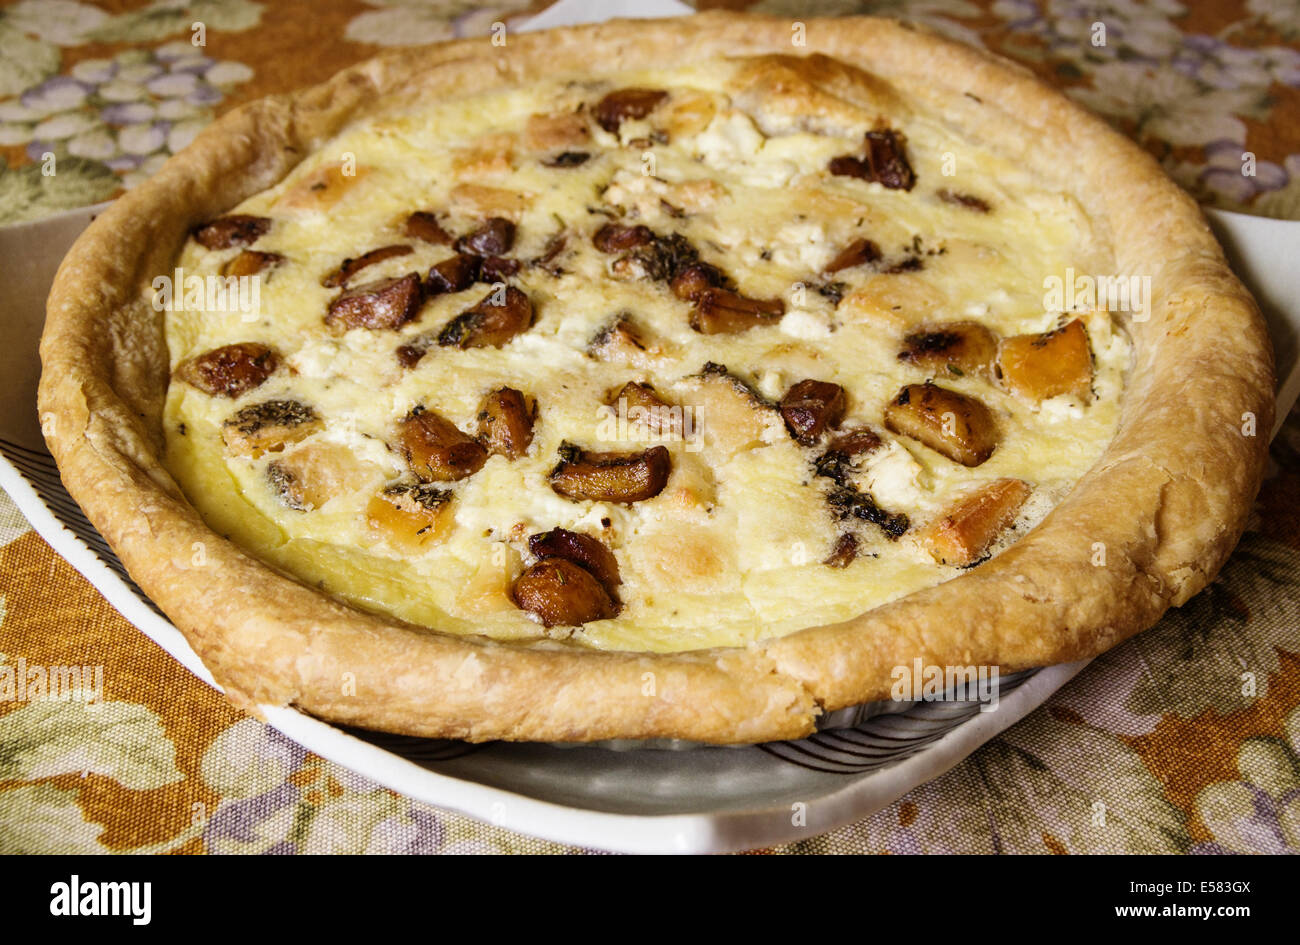 home made roasted garlic torte on serving platter Stock Photo